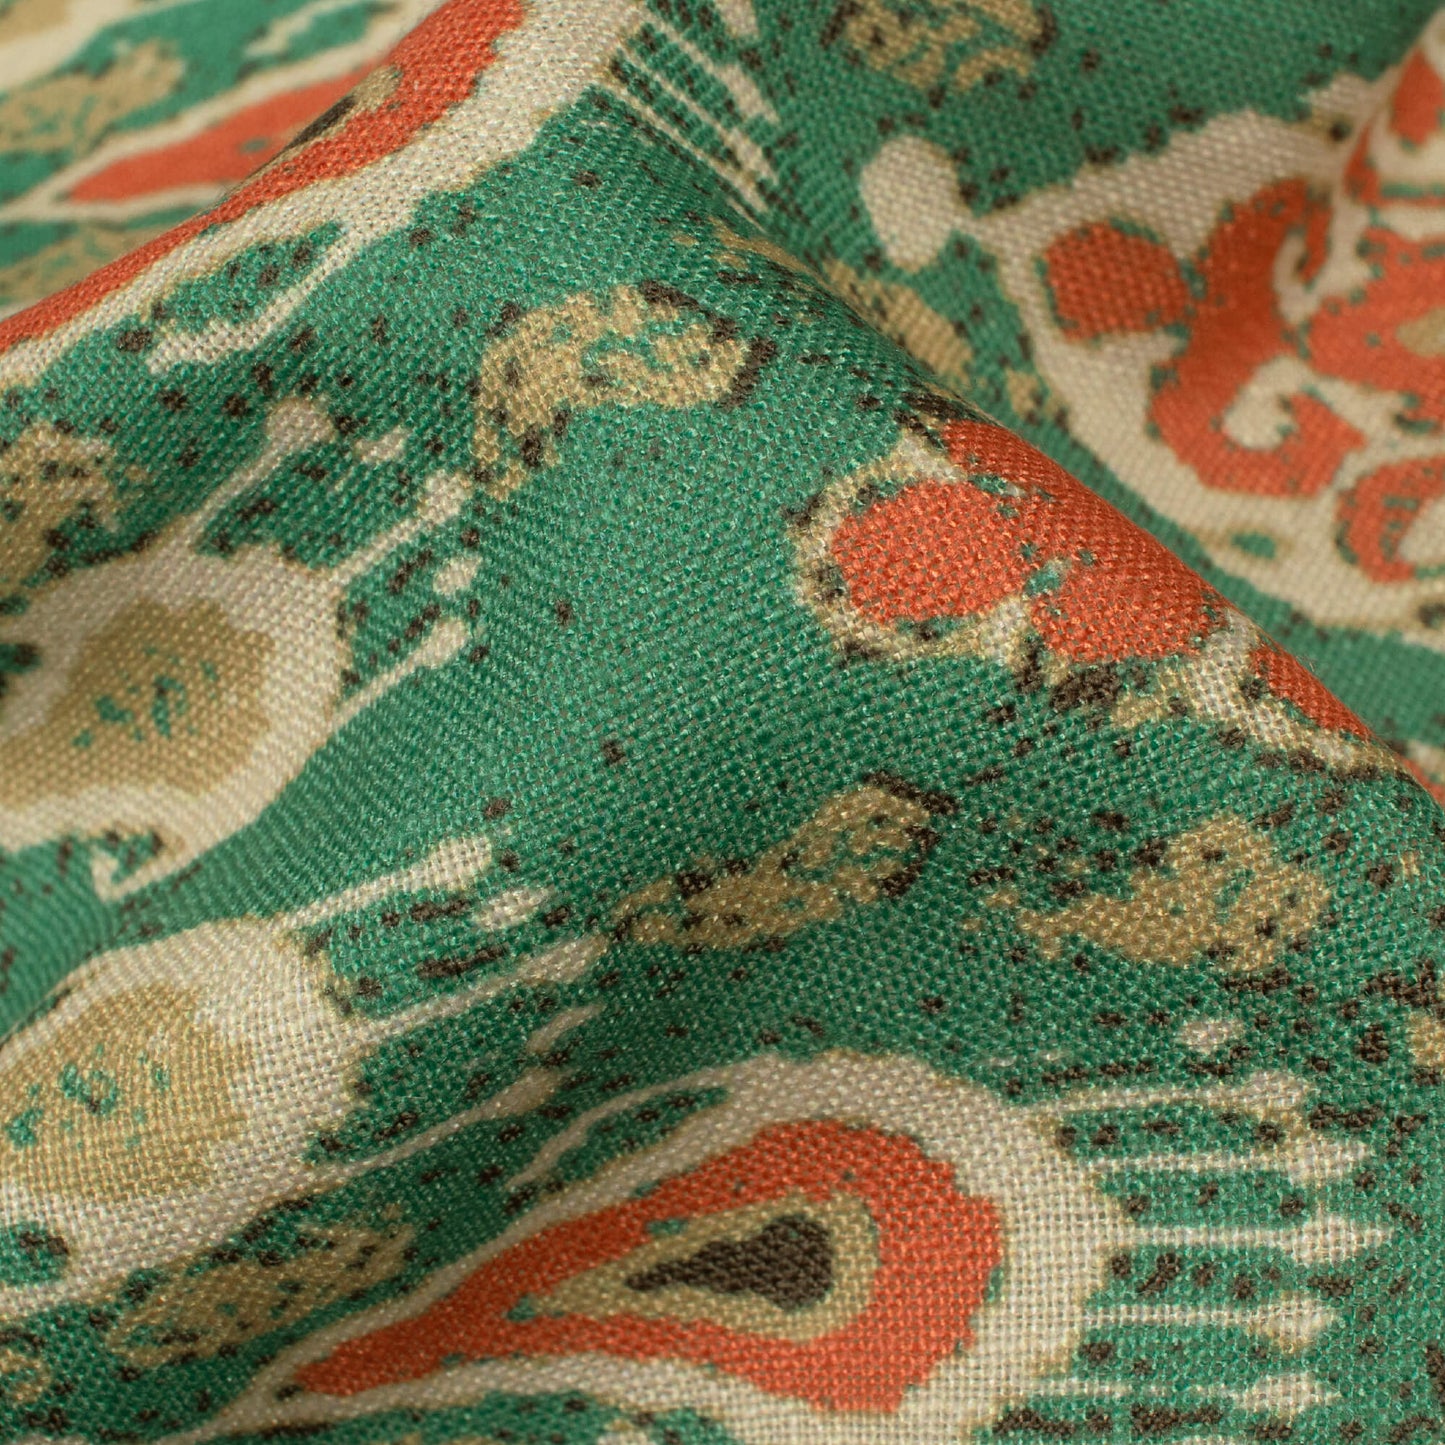 Middle Green And Coral Orange Ethnic Pattern Digital Print Linen Textured Fabric (Width 56 Inches)